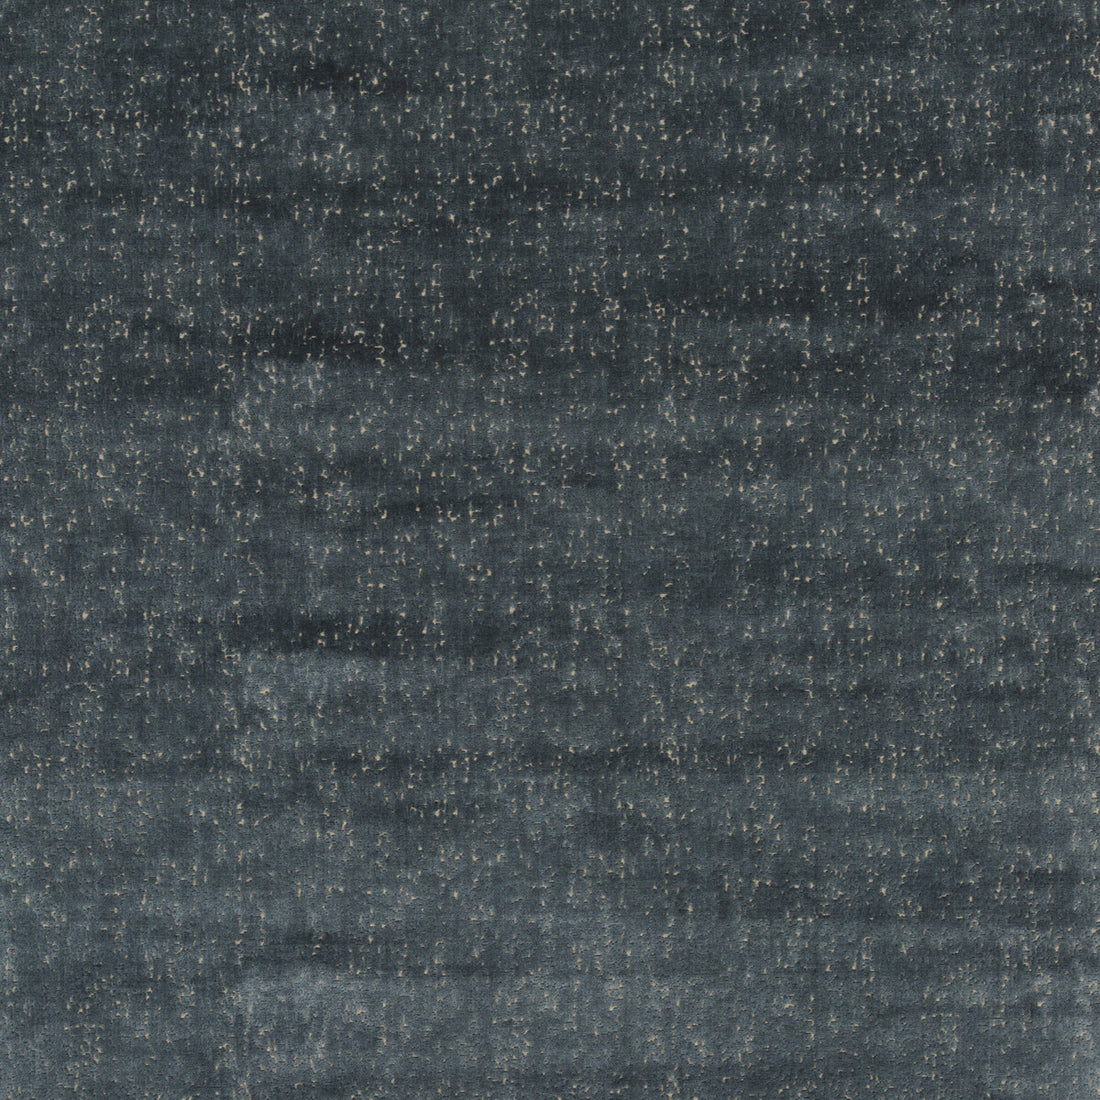 Tango Texture fabric in indigo color - pattern PF50422.680.0 - by Baker Lifestyle in the Carnival collection